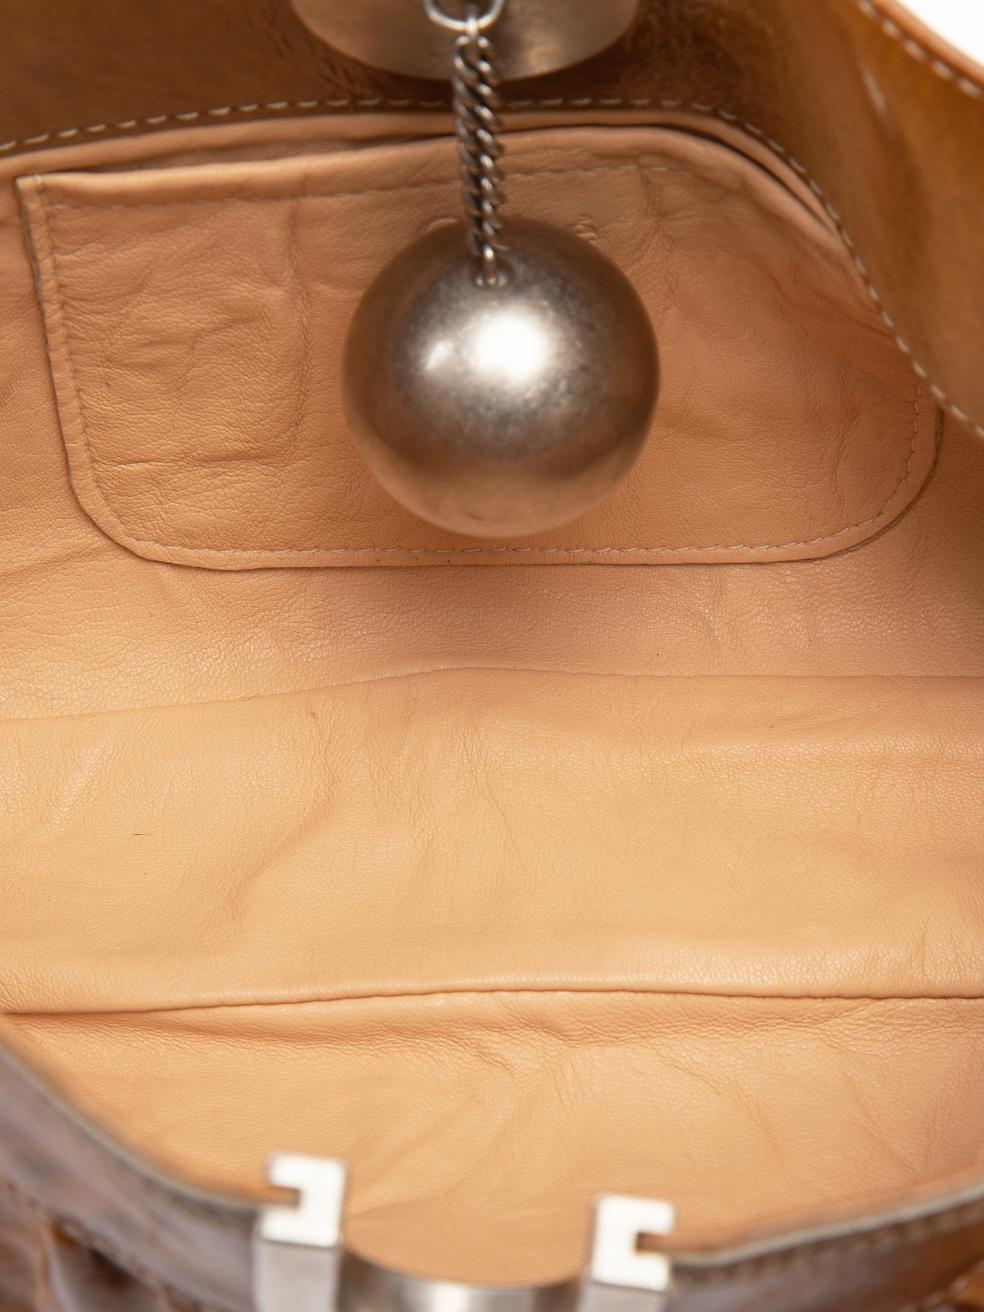 Chloé Women's Brown Patent Leather Ball Accent Clutch Bag 2